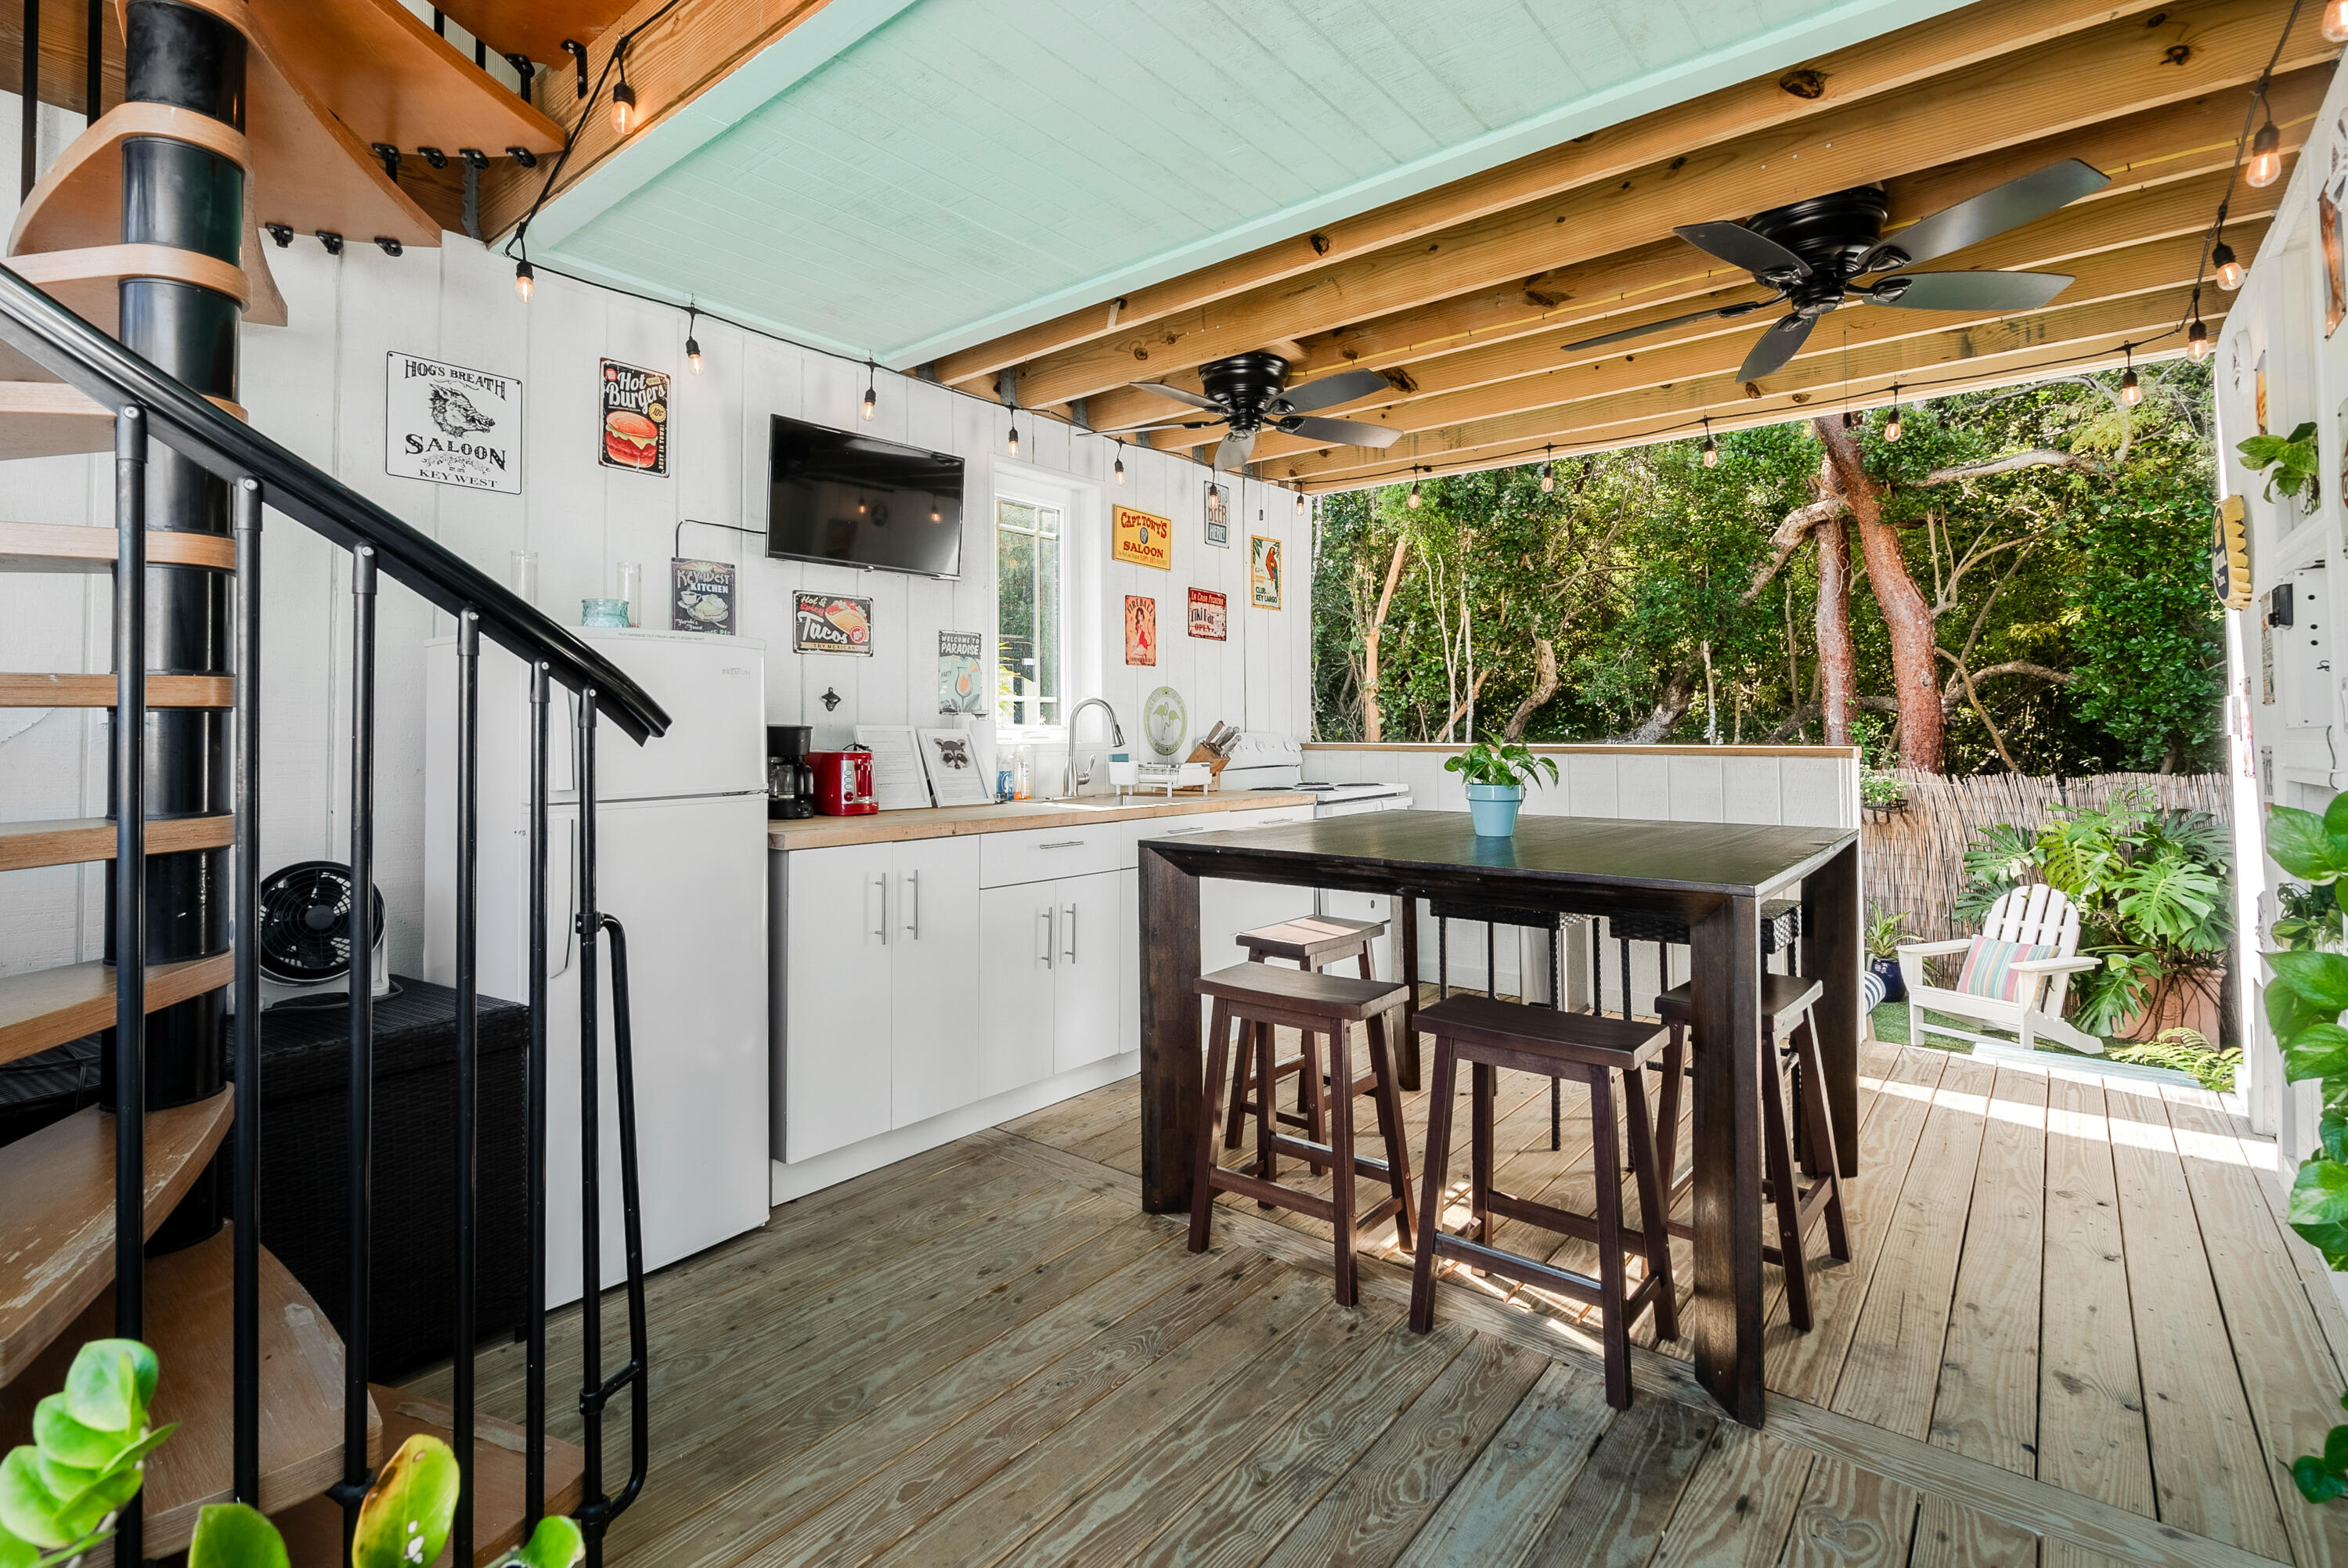 a view of a patio with table and chairs a barbeque with wooden floor and outdoor space